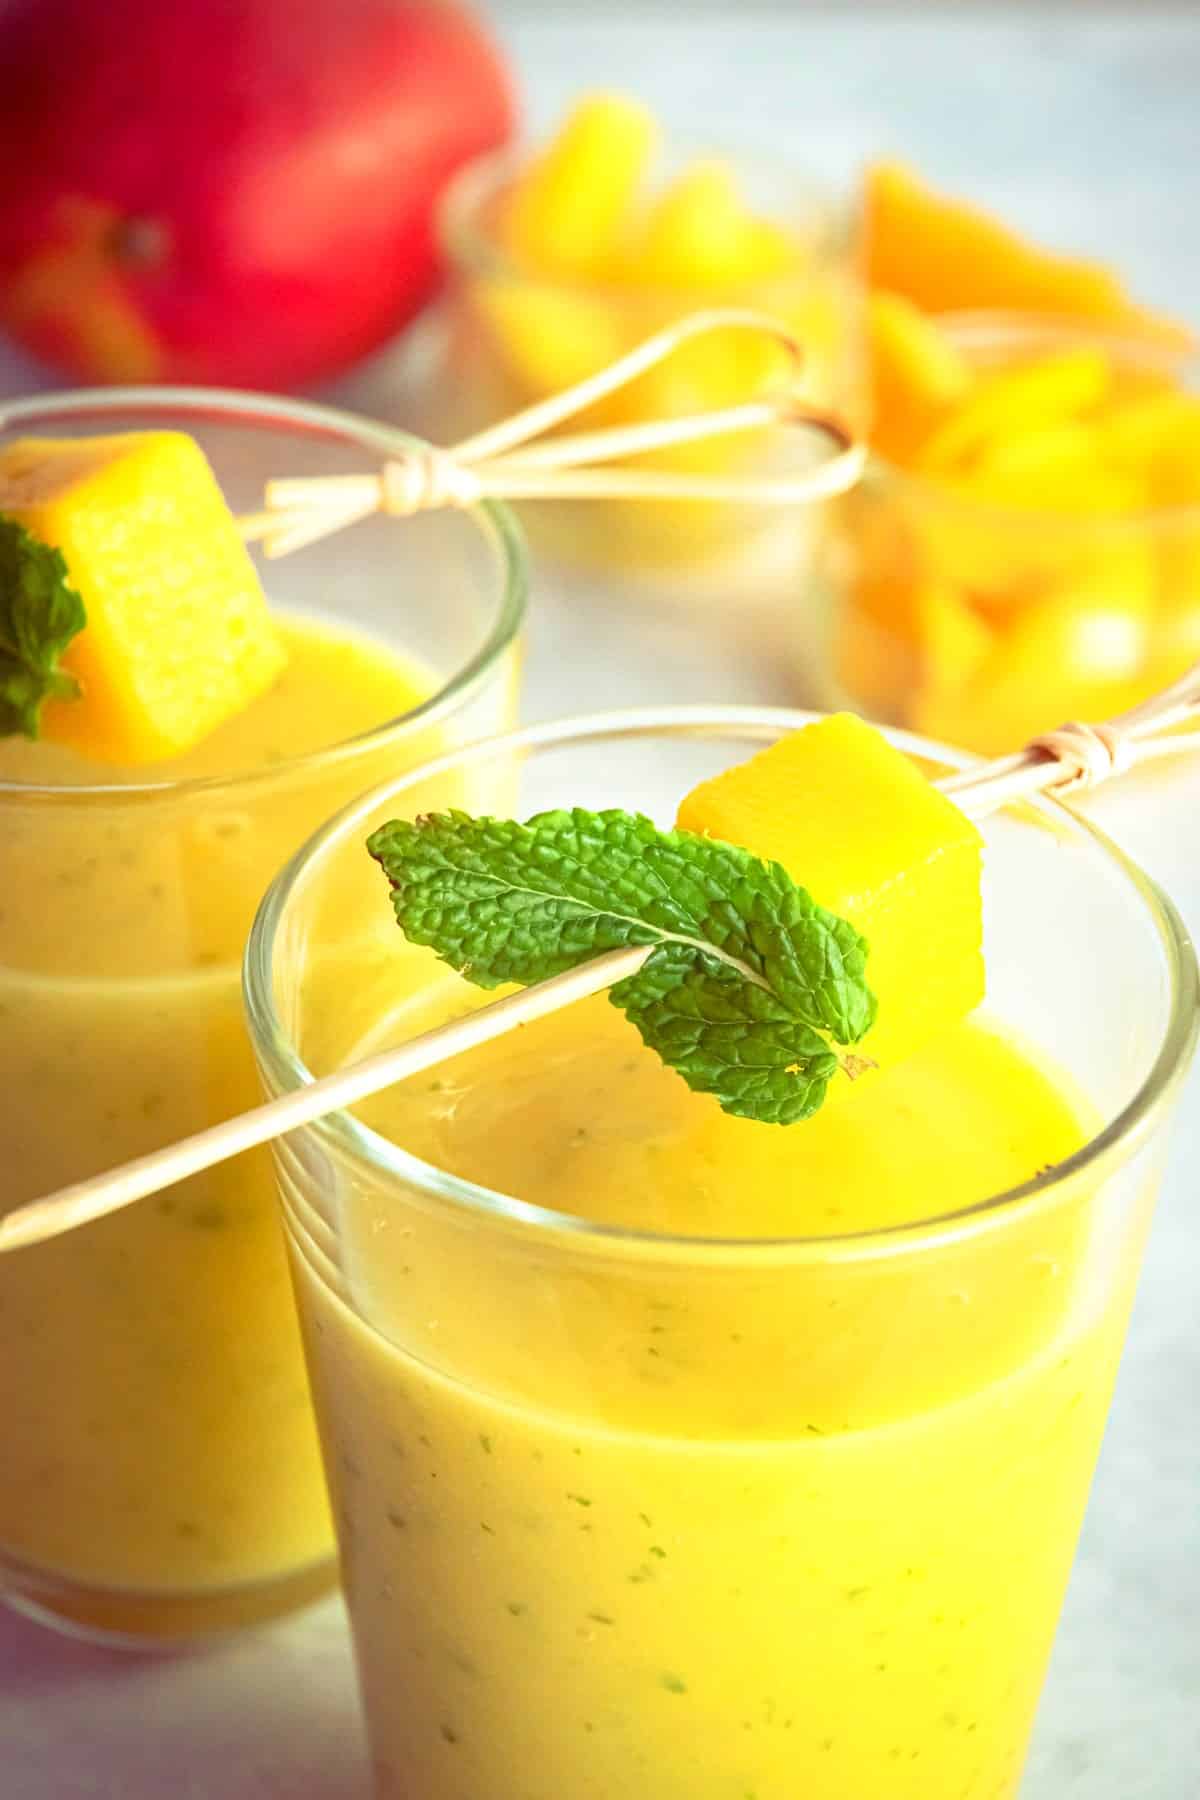 Mango pineapple smoothie in glass with mango skewer.